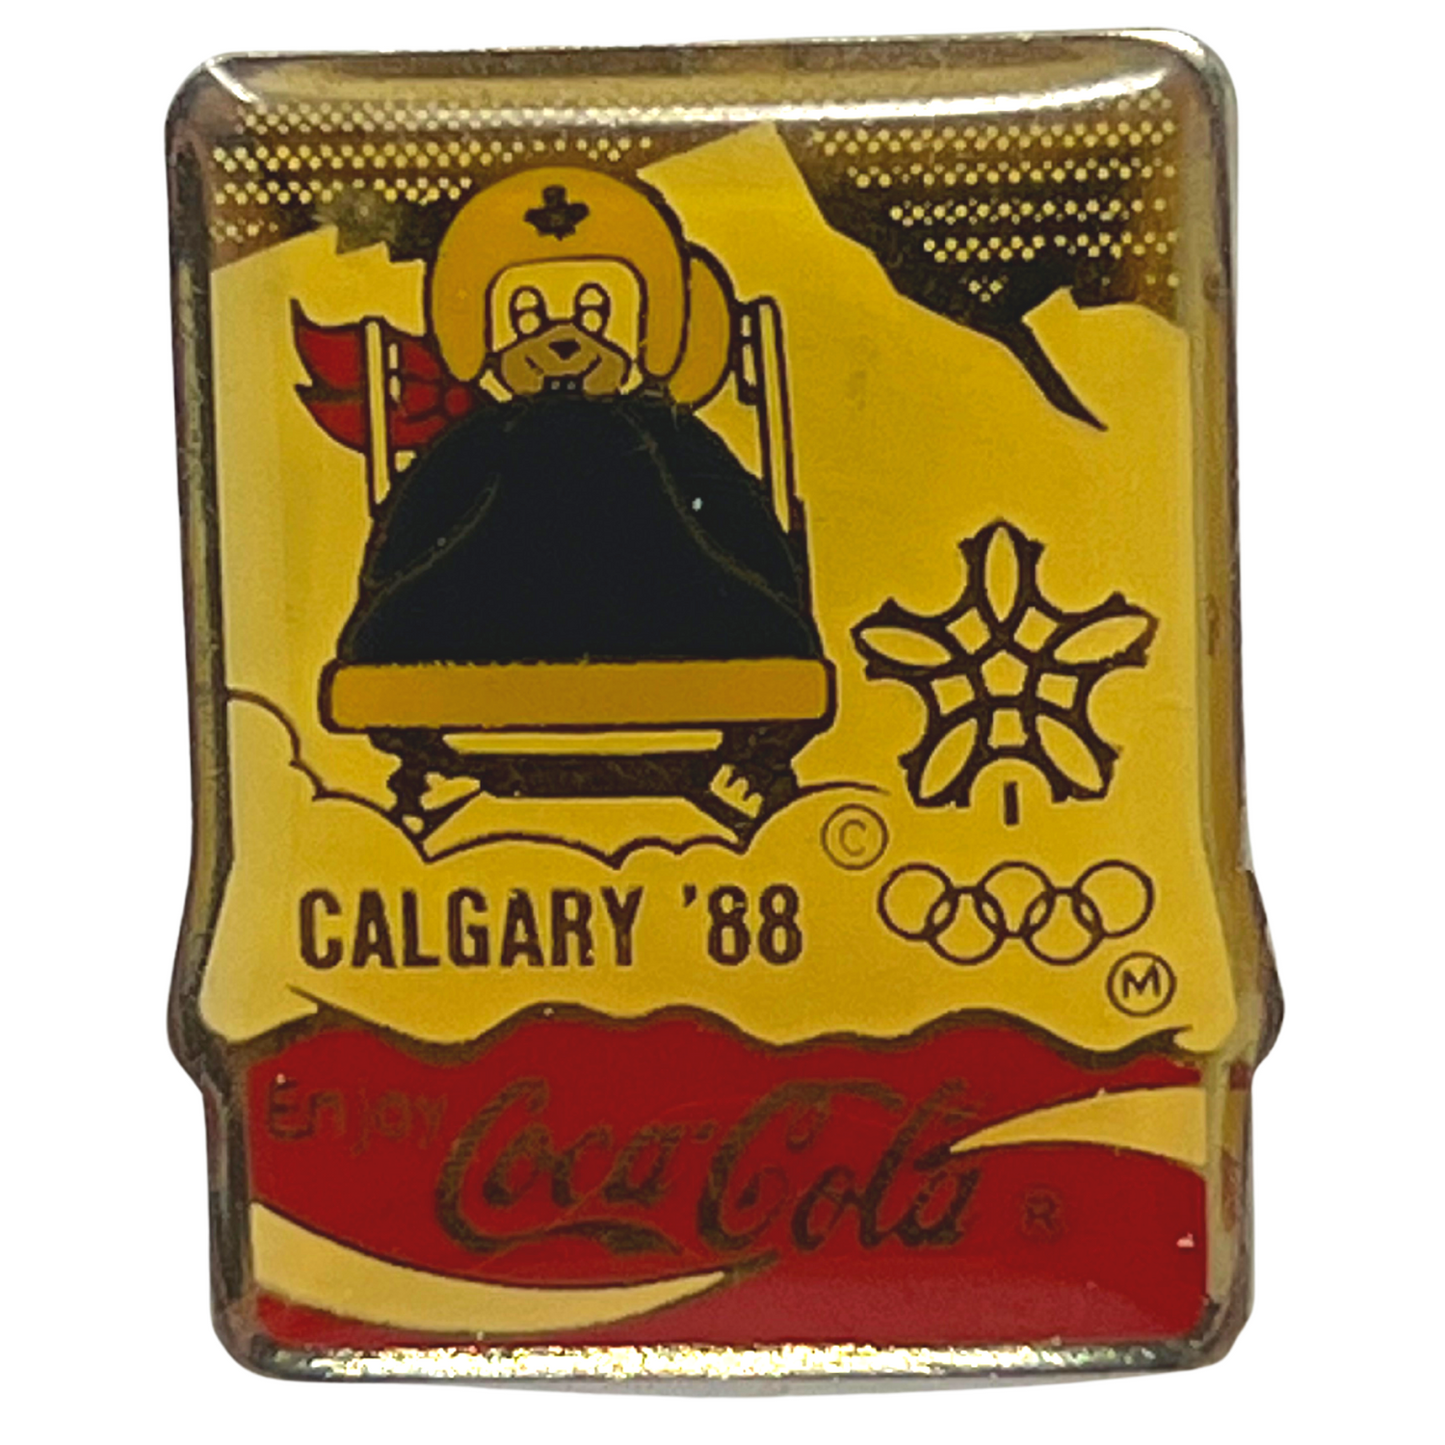 Coca Cola 1988 Calgary Winter Olympic Games (Bobsleigh) Olympics Lapel Pin